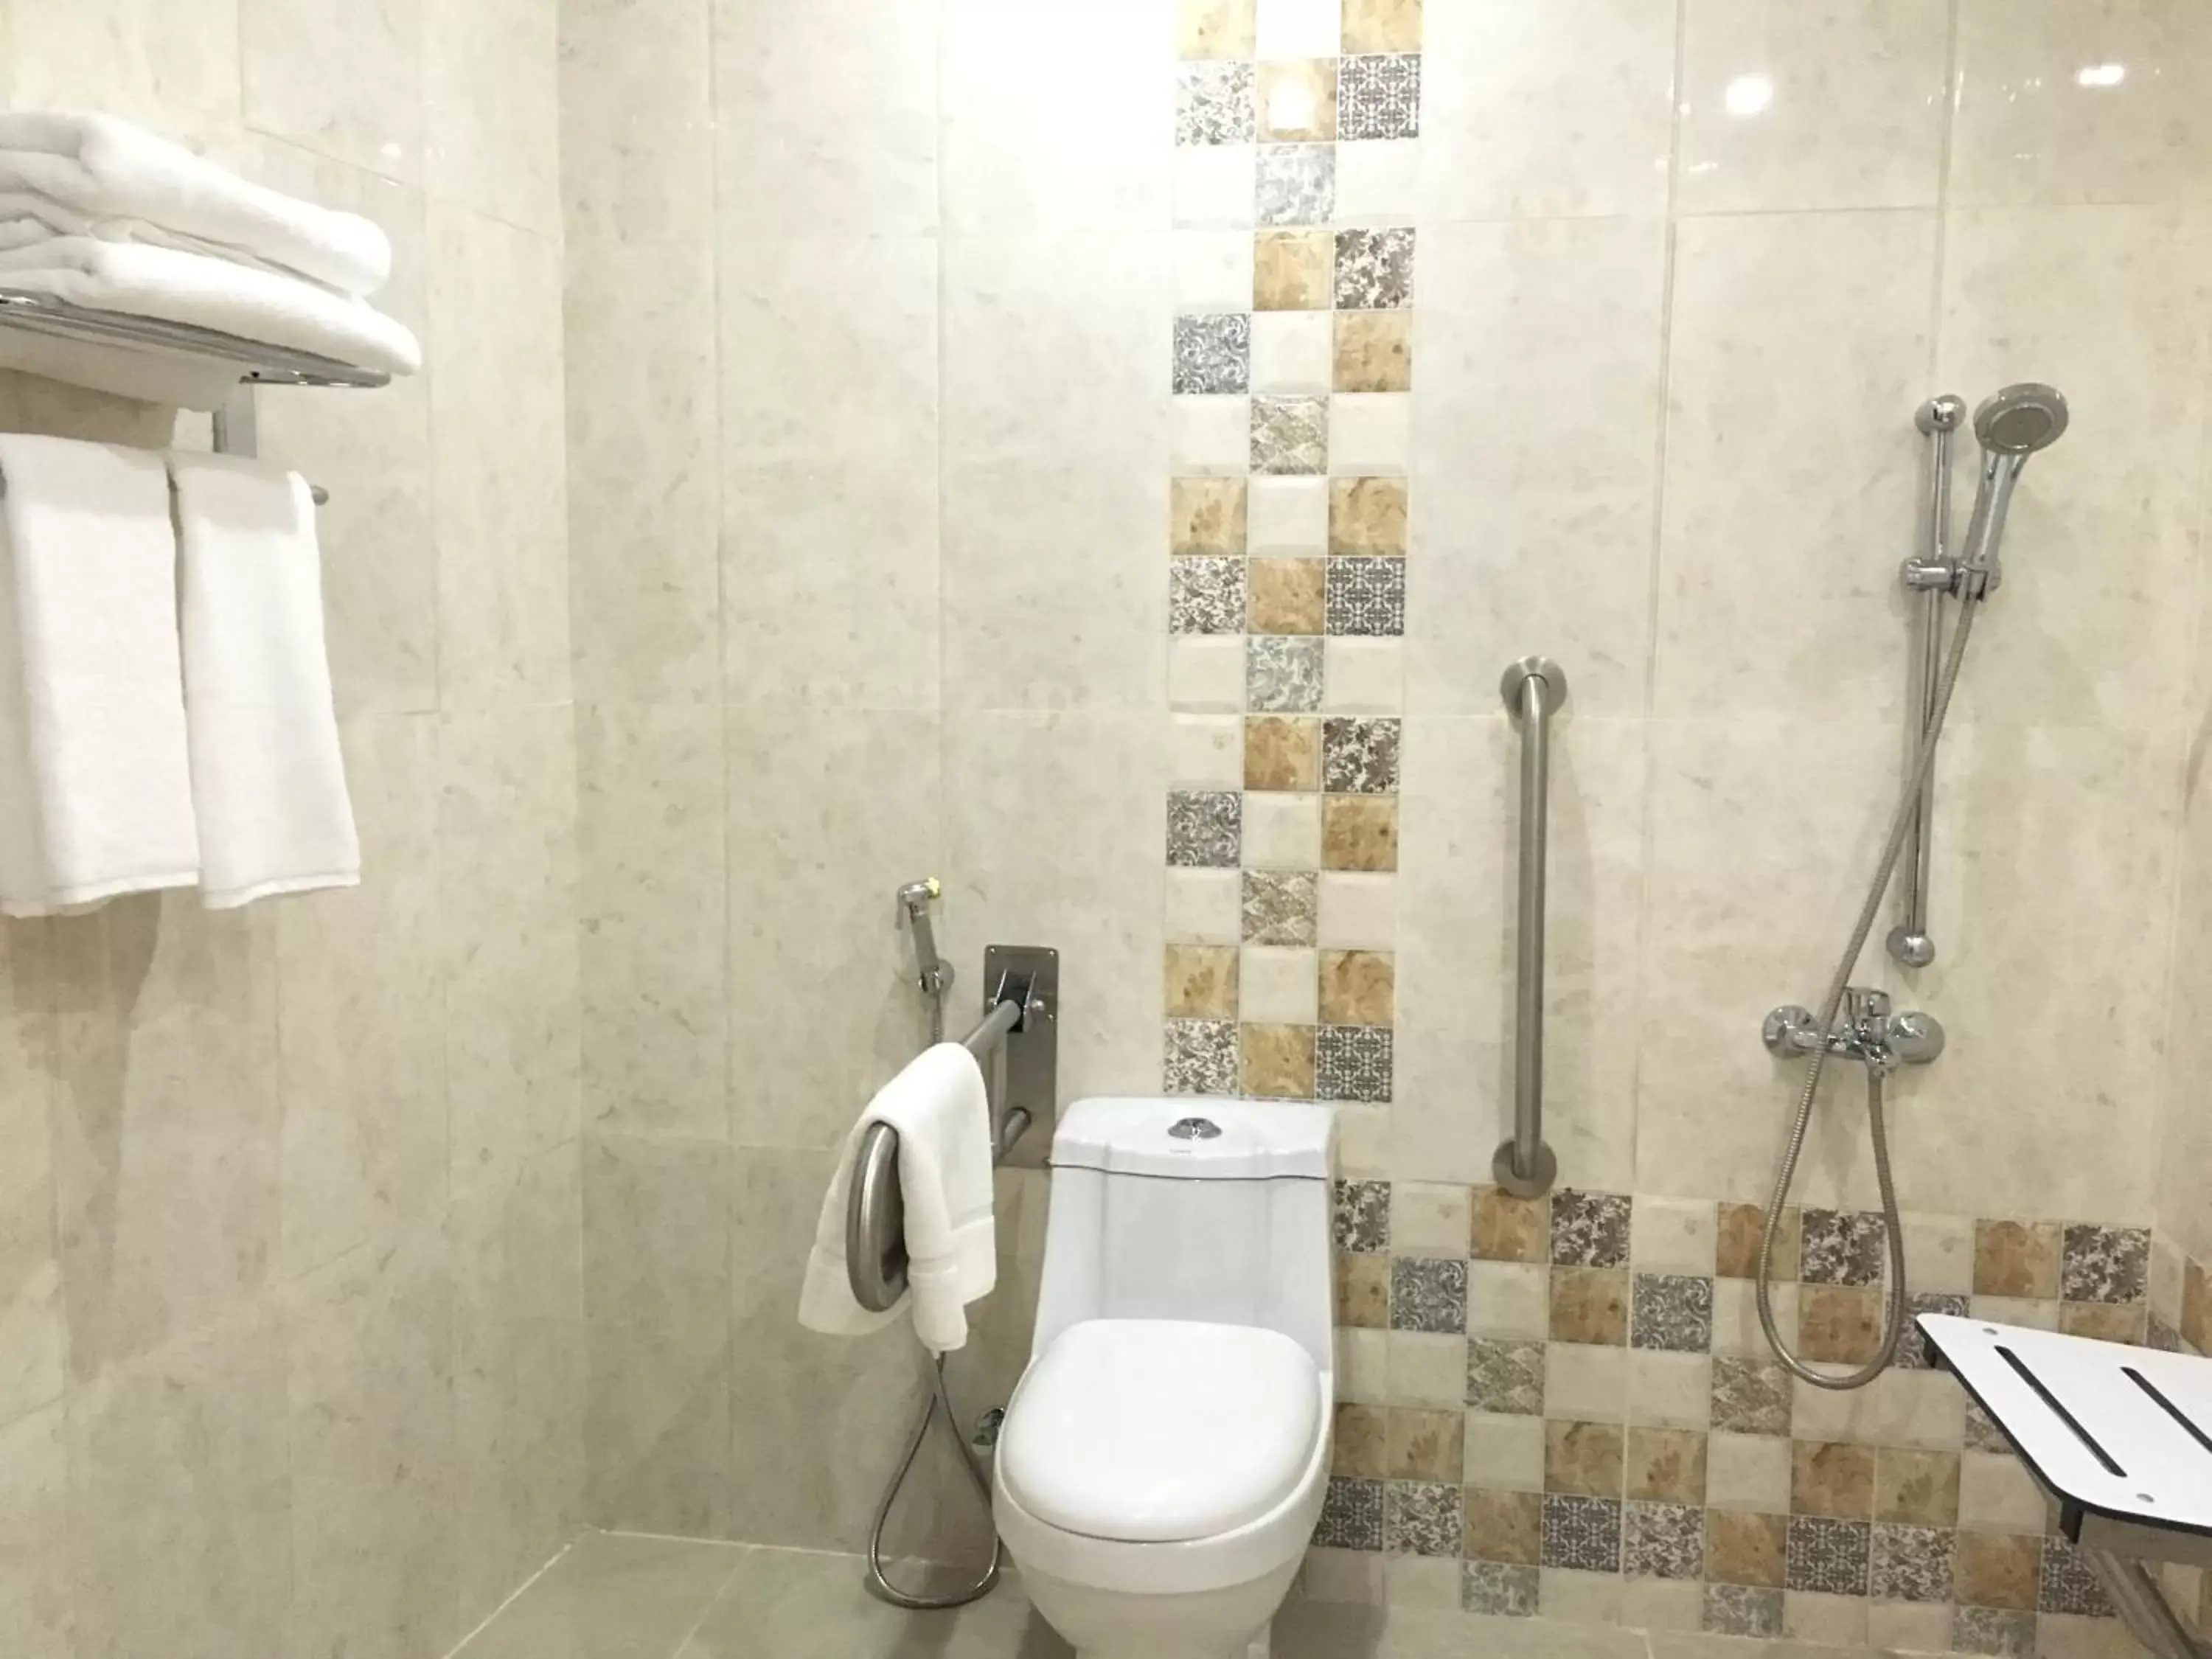 Facility for disabled guests, Bathroom in Royal Tulip Hotel LLC